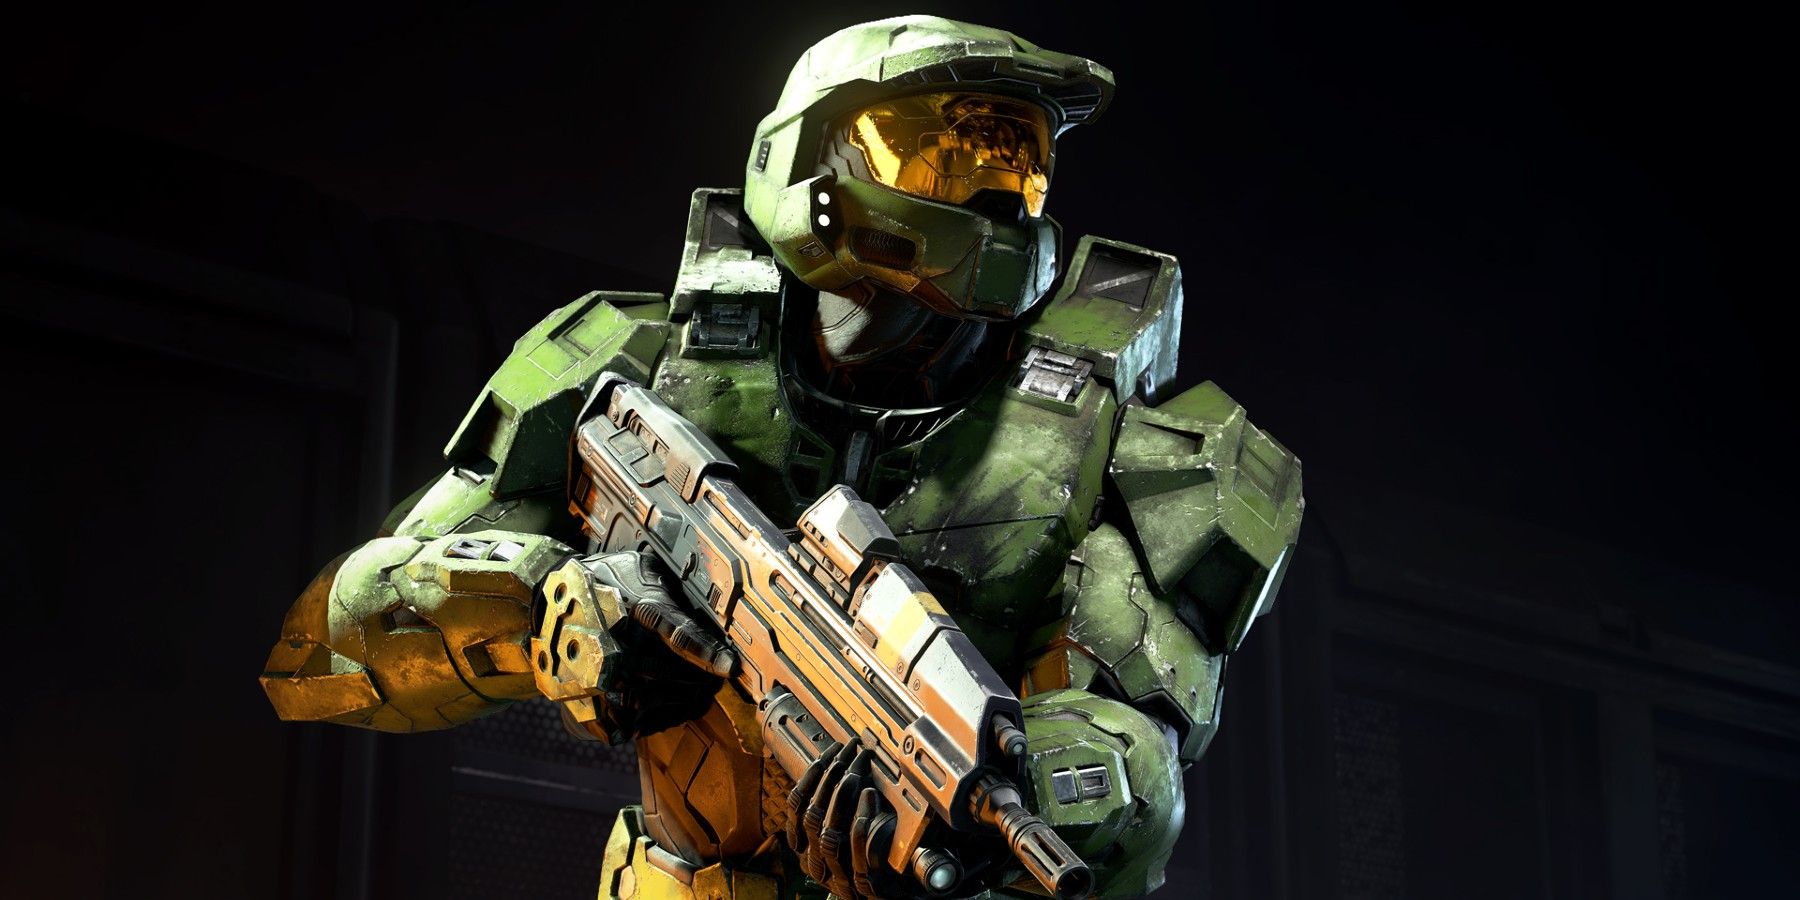 343 Industries hints a new place to play Halo: The Master Chief